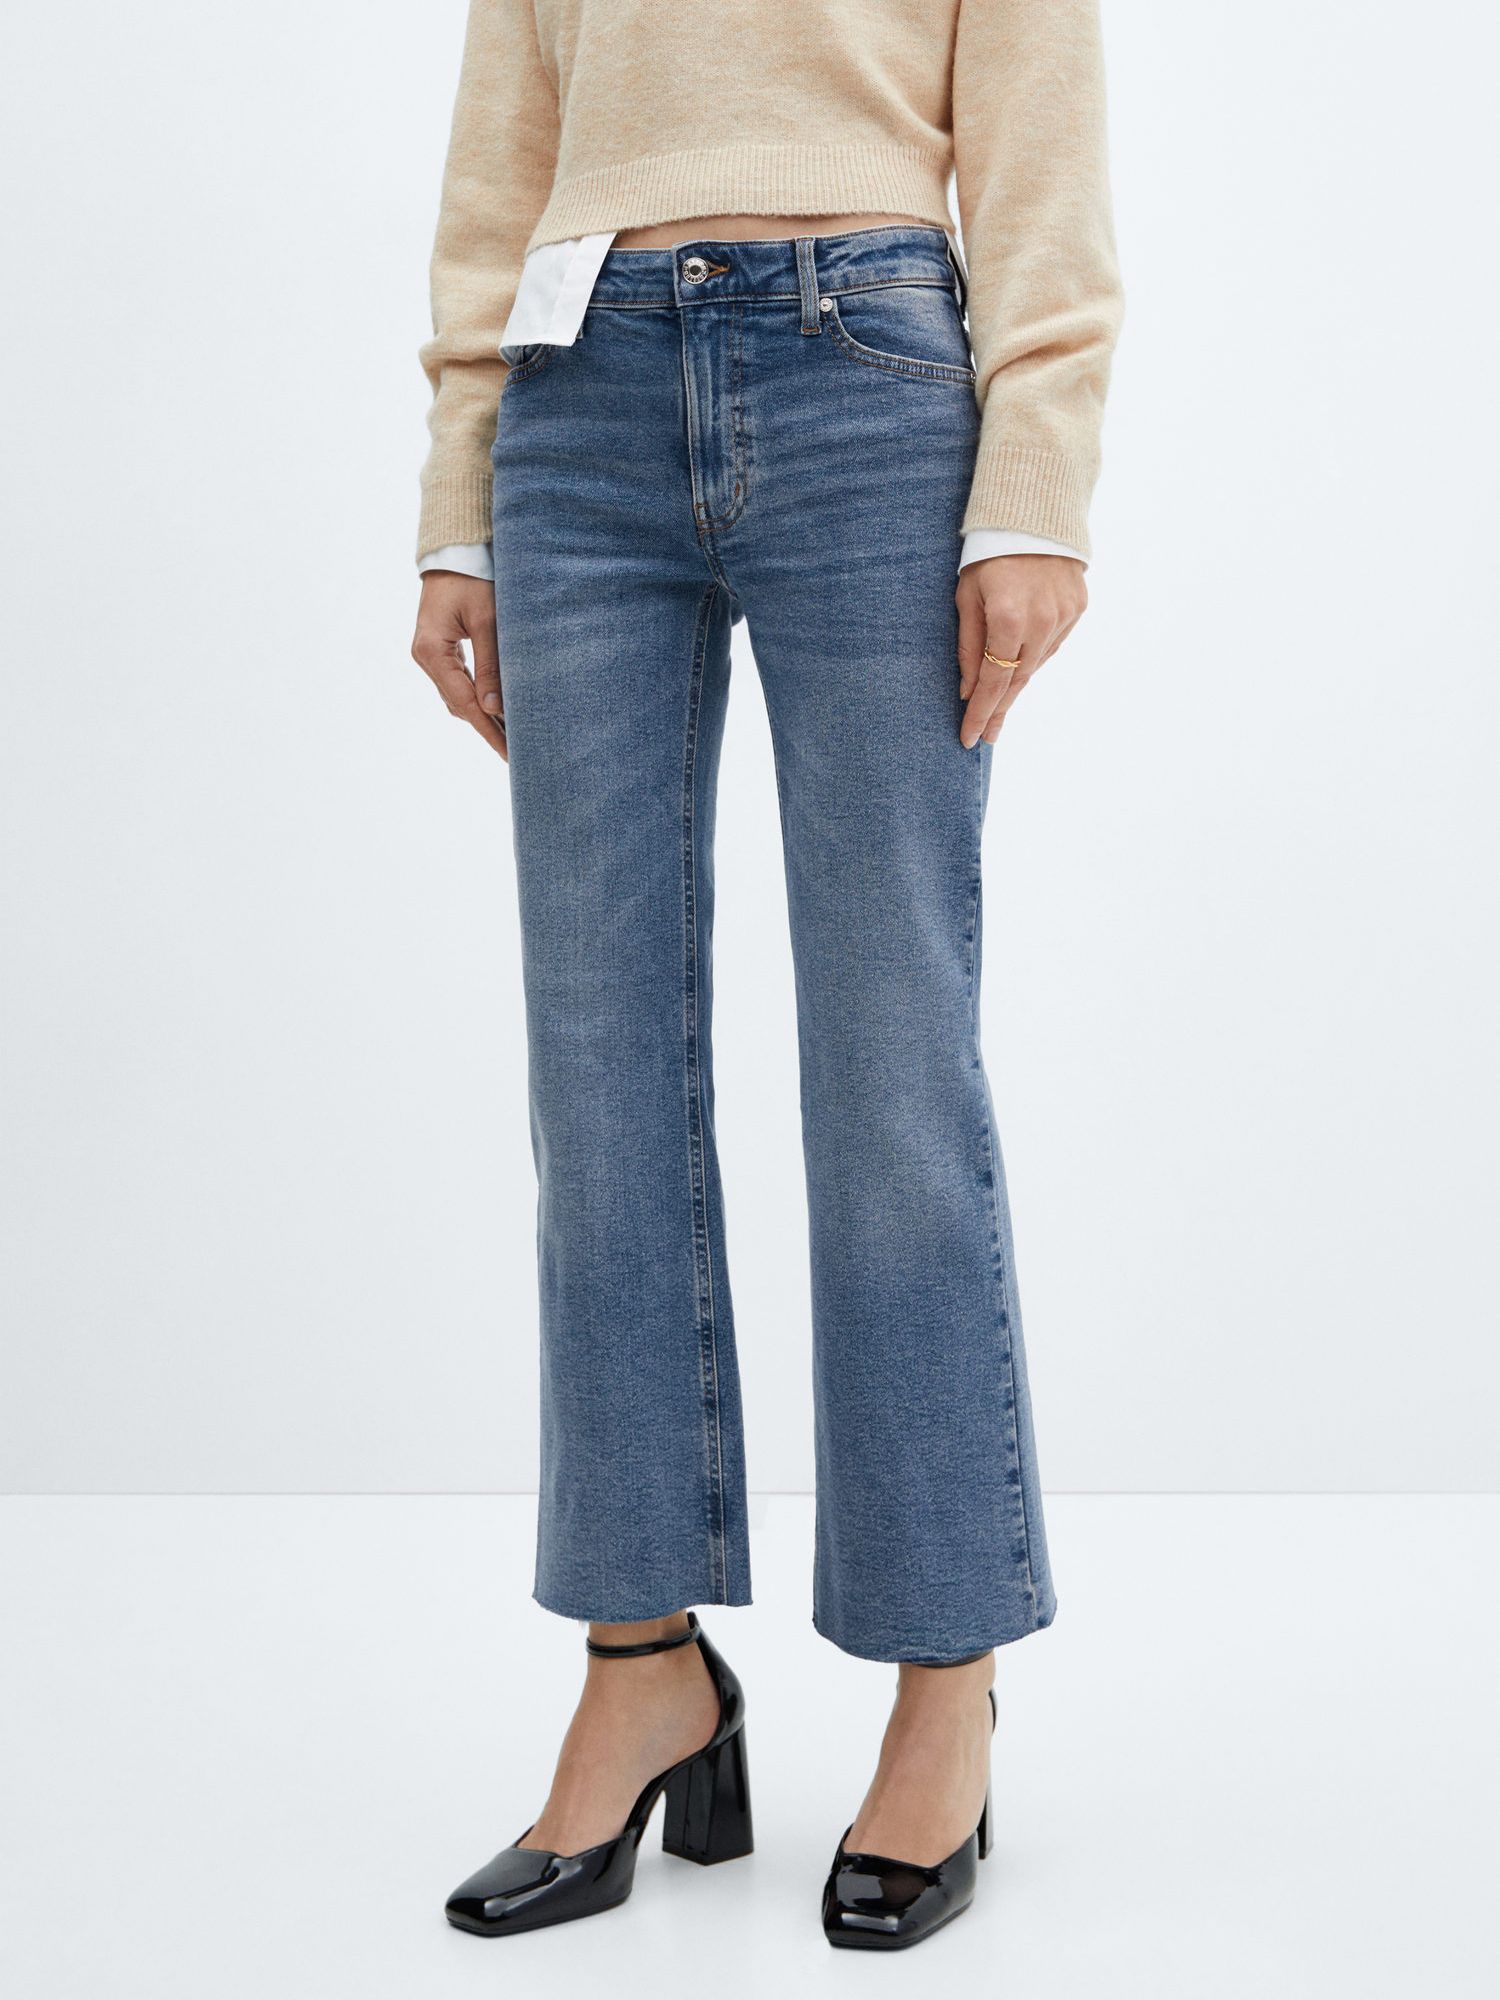 Cropped high waisted jeans